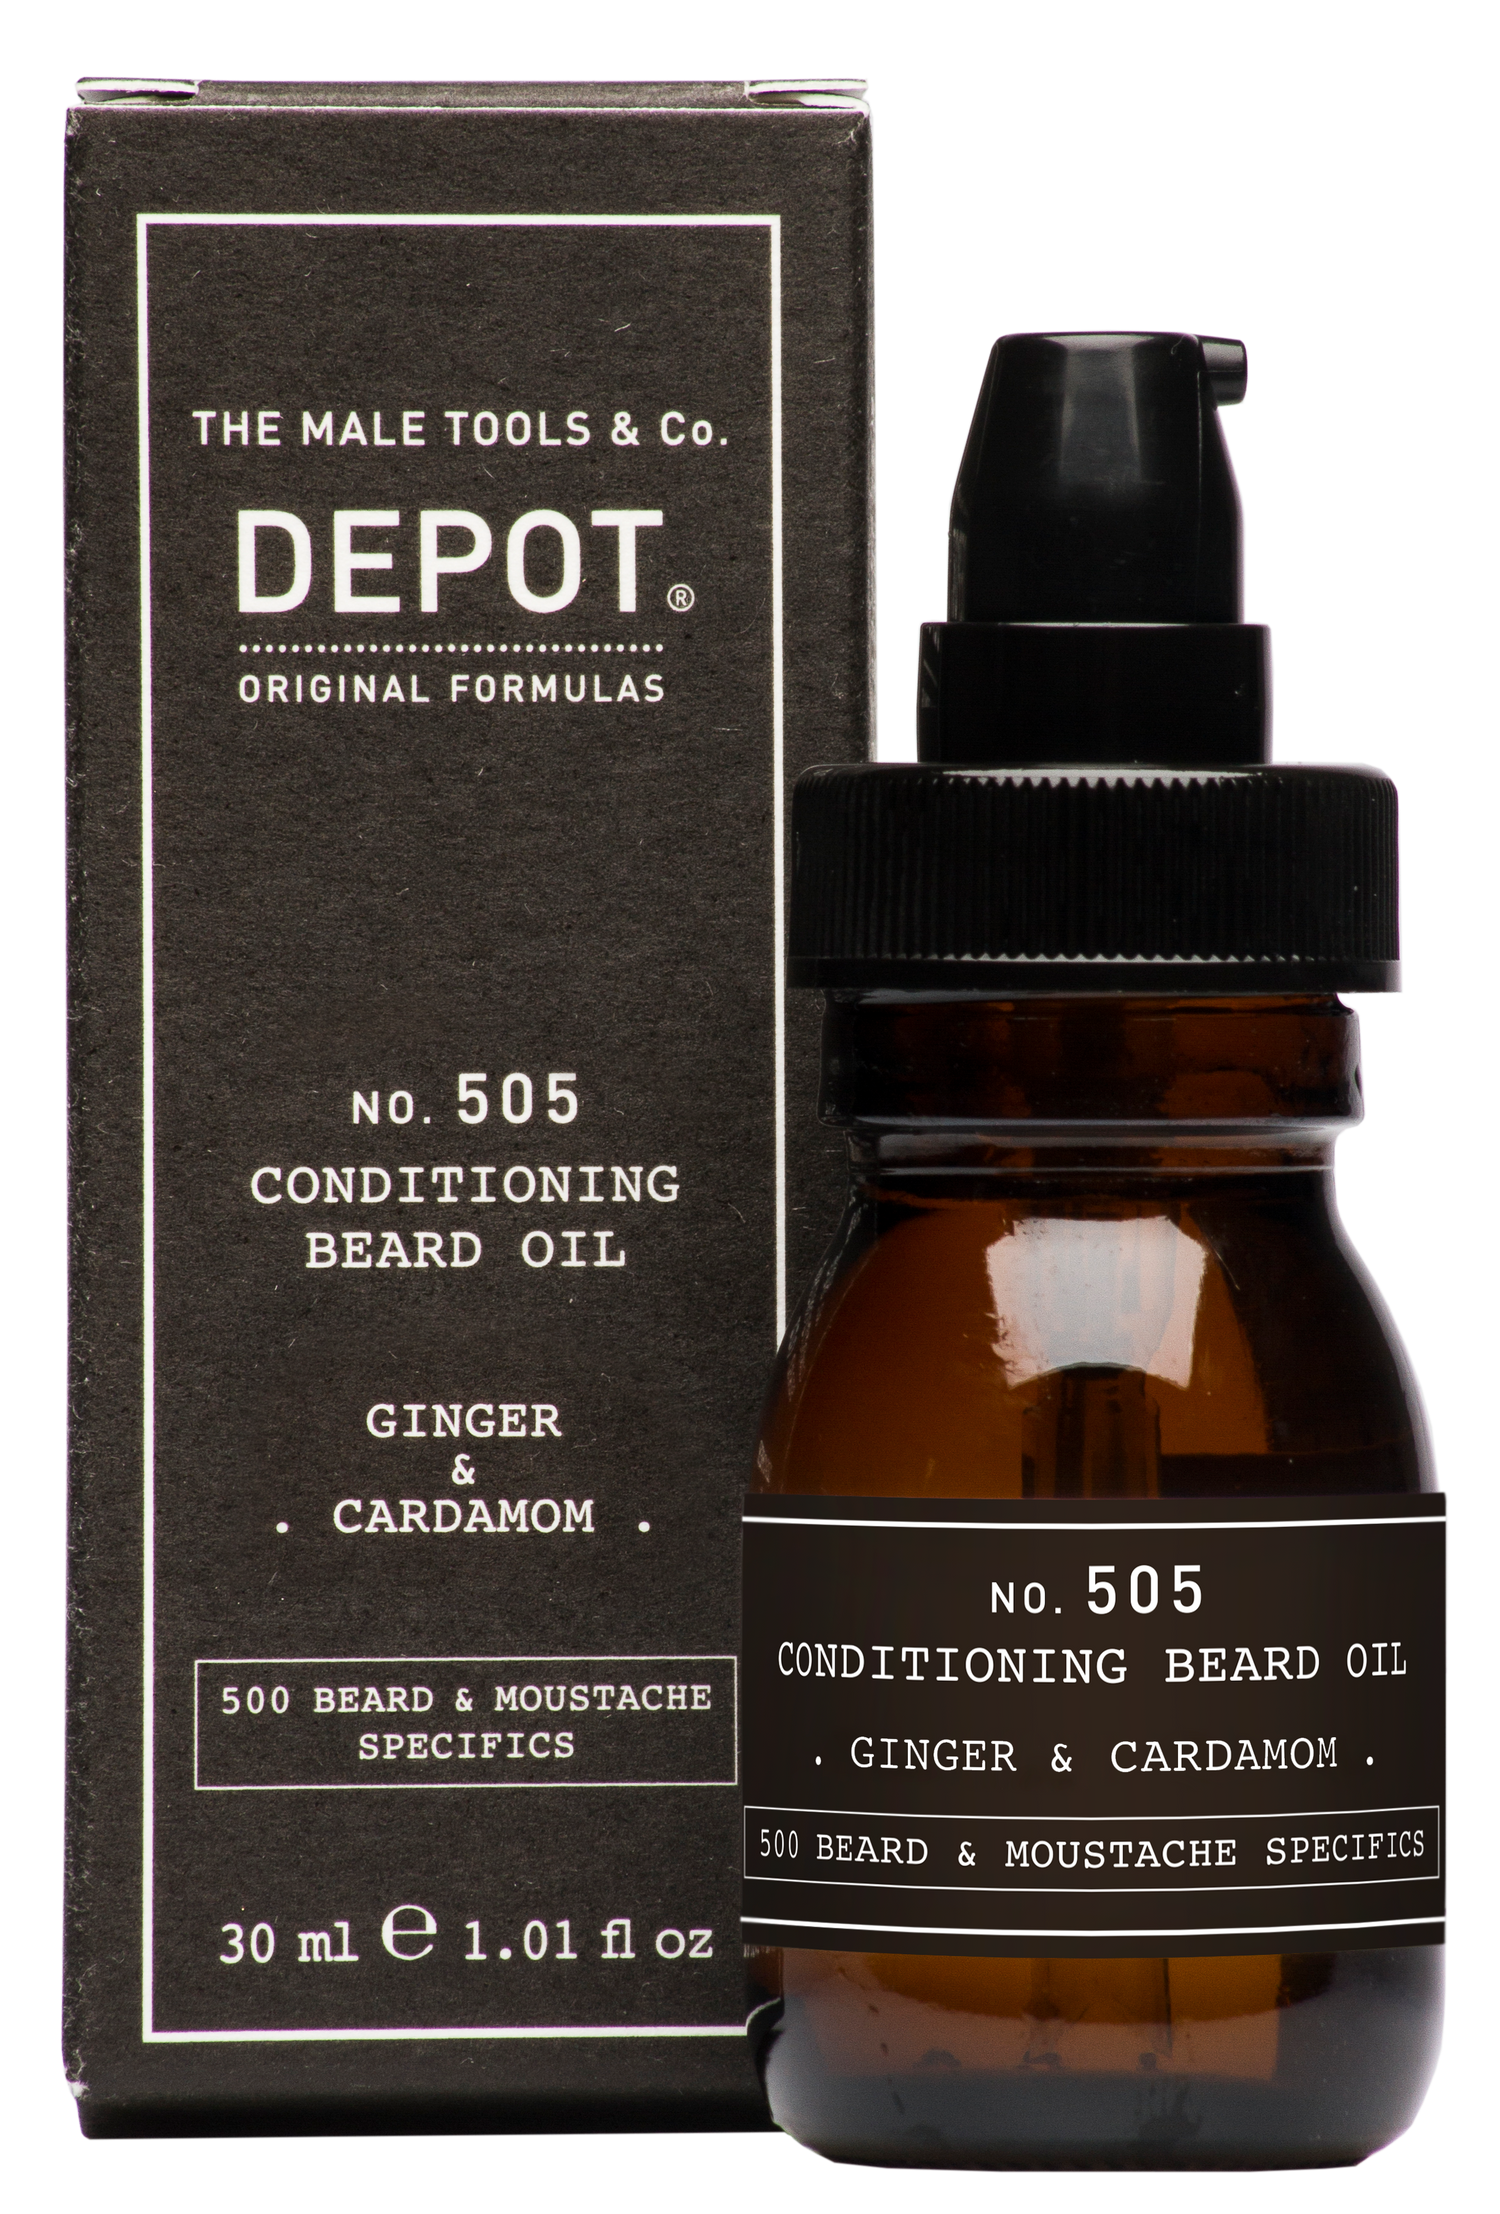 DEPOT MALE TOOL NO. 505 CONDITIONING BEARD OIL GINGER &amp; CARDAMOM